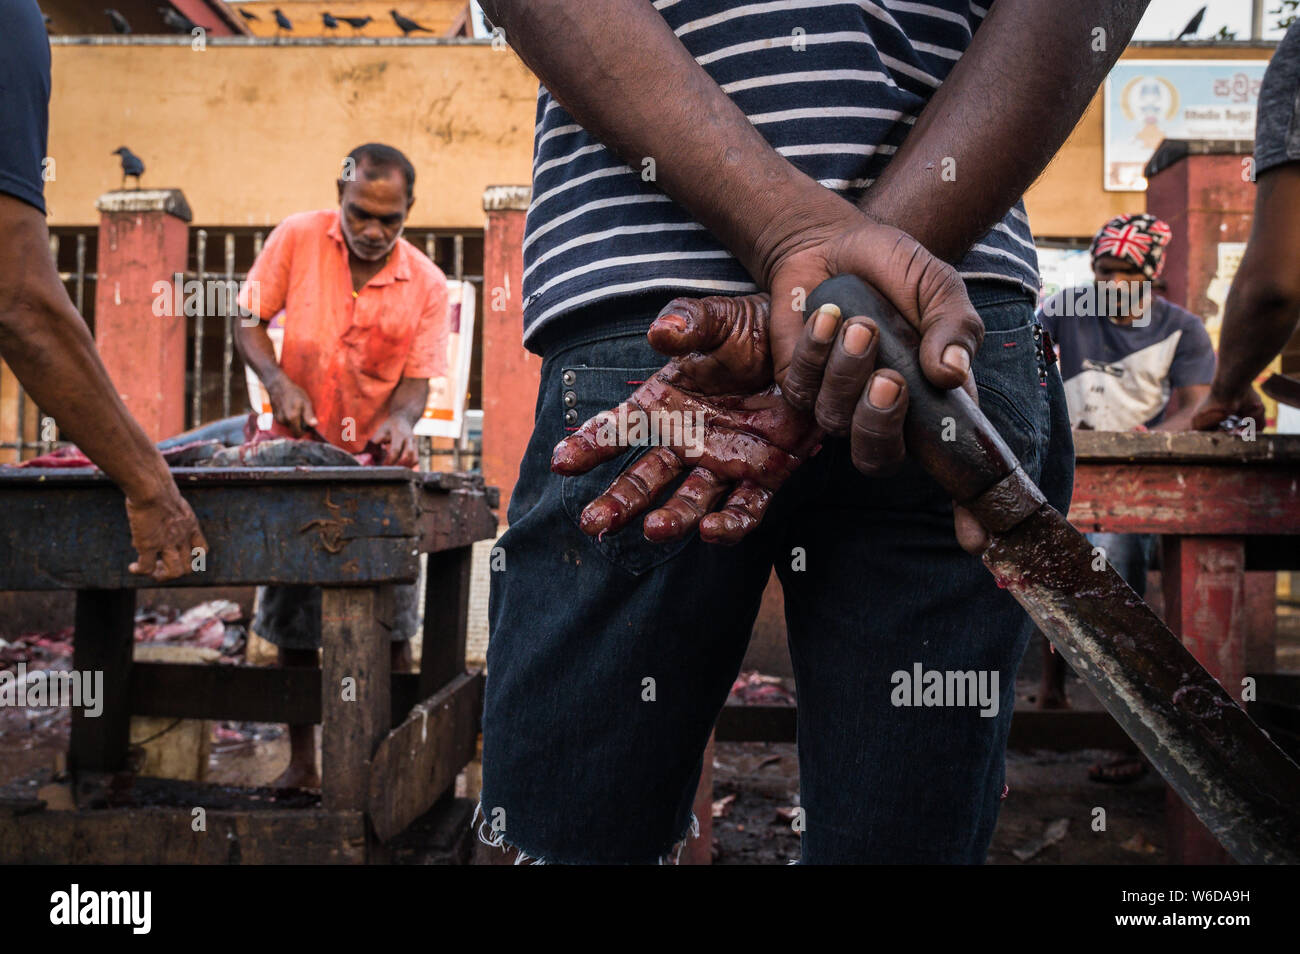 Men cutting up fish with crows in the background, Negombo Fishery Harbour, Negombo, Sri Lanka Stock Photo